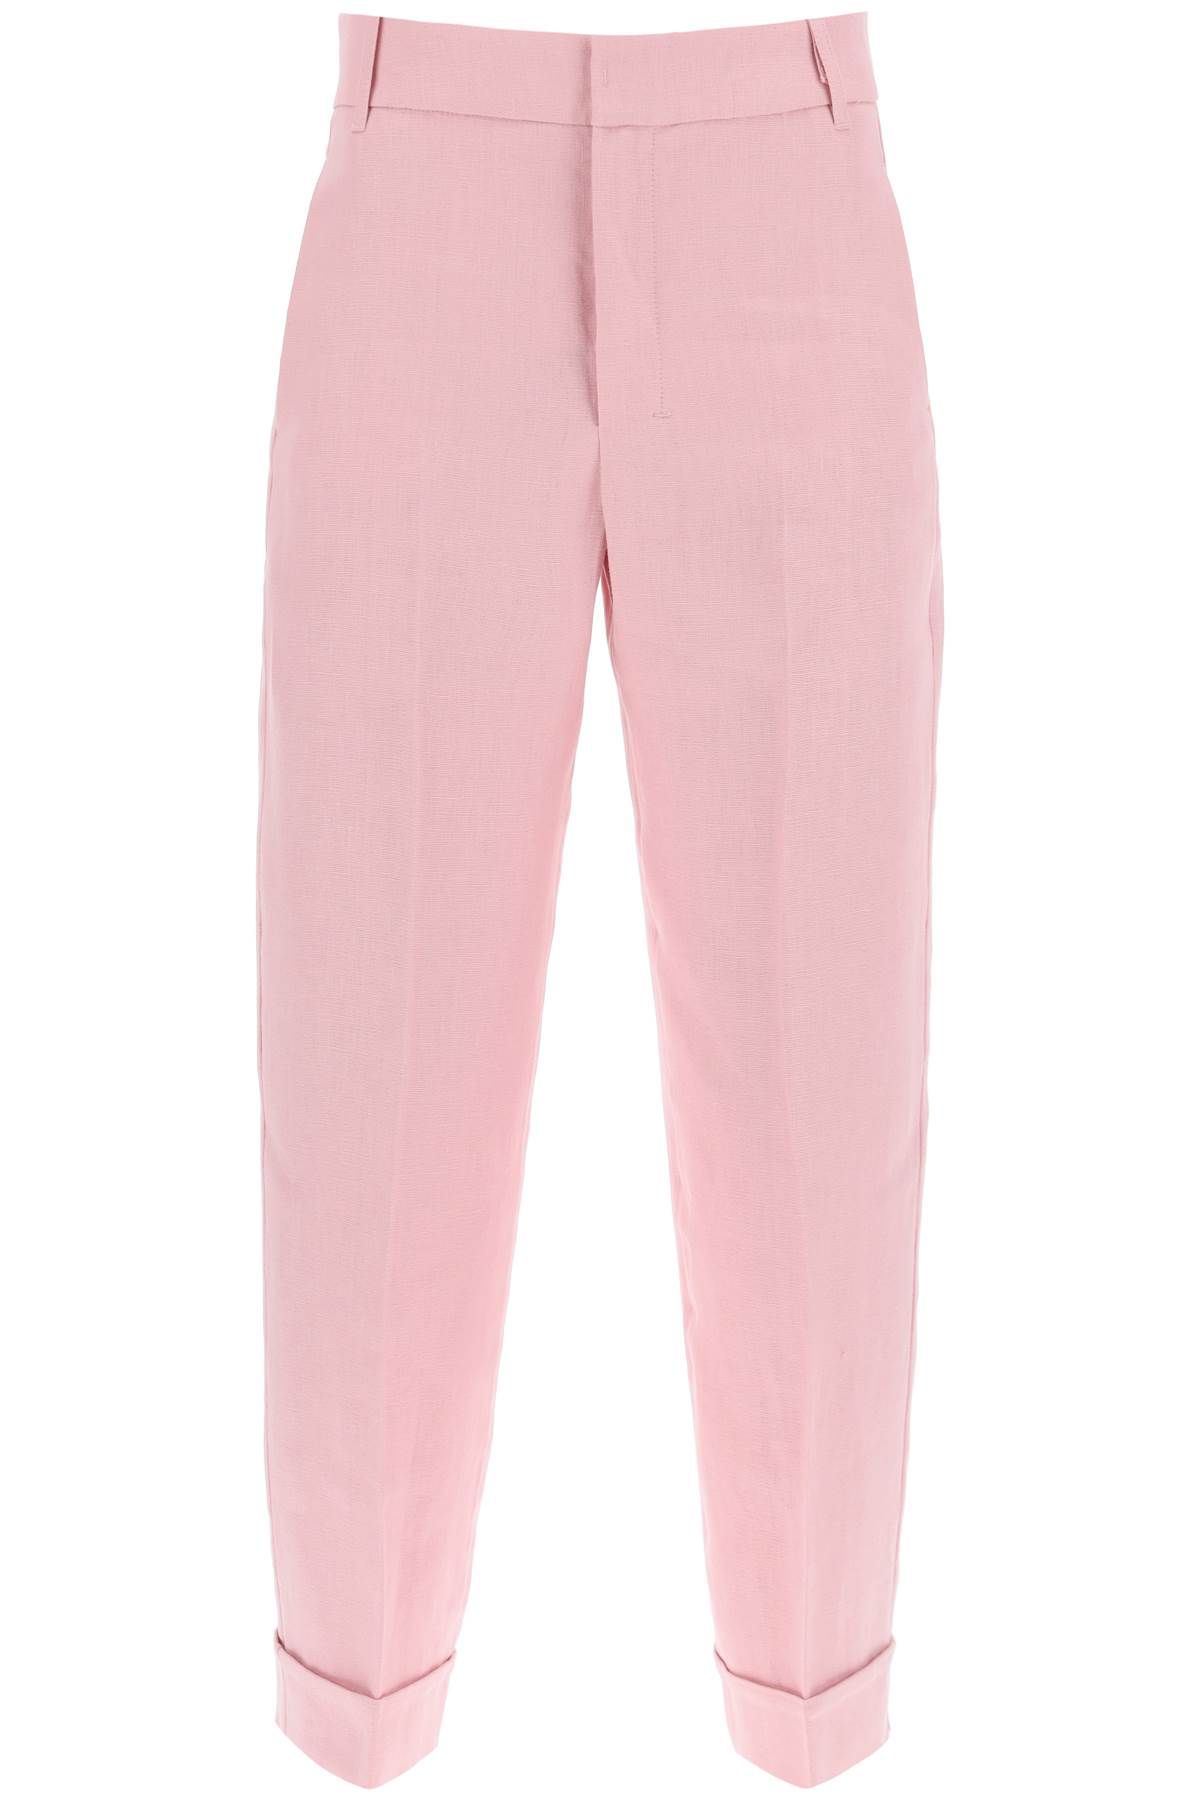 's Max Mara 'linen Cigarette Trousers In 'salix In Pink